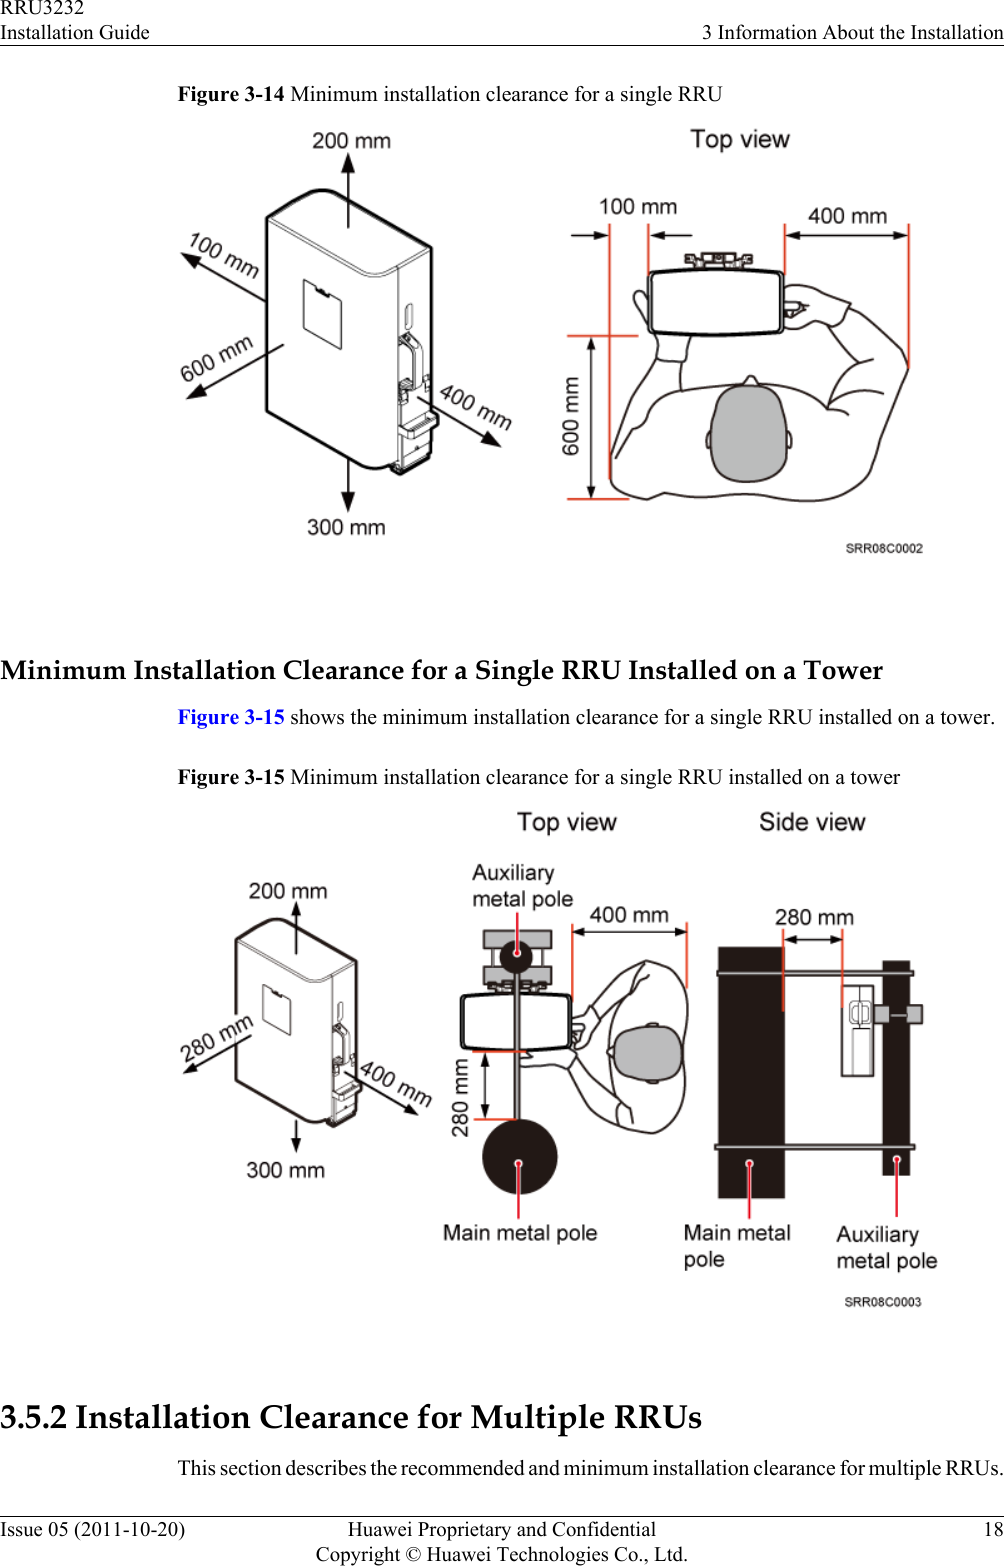 Figure 3-14 Minimum installation clearance for a single RRU Minimum Installation Clearance for a Single RRU Installed on a TowerFigure 3-15 shows the minimum installation clearance for a single RRU installed on a tower.Figure 3-15 Minimum installation clearance for a single RRU installed on a tower 3.5.2 Installation Clearance for Multiple RRUsThis section describes the recommended and minimum installation clearance for multiple RRUs.RRU3232Installation Guide 3 Information About the InstallationIssue 05 (2011-10-20) Huawei Proprietary and ConfidentialCopyright © Huawei Technologies Co., Ltd.18